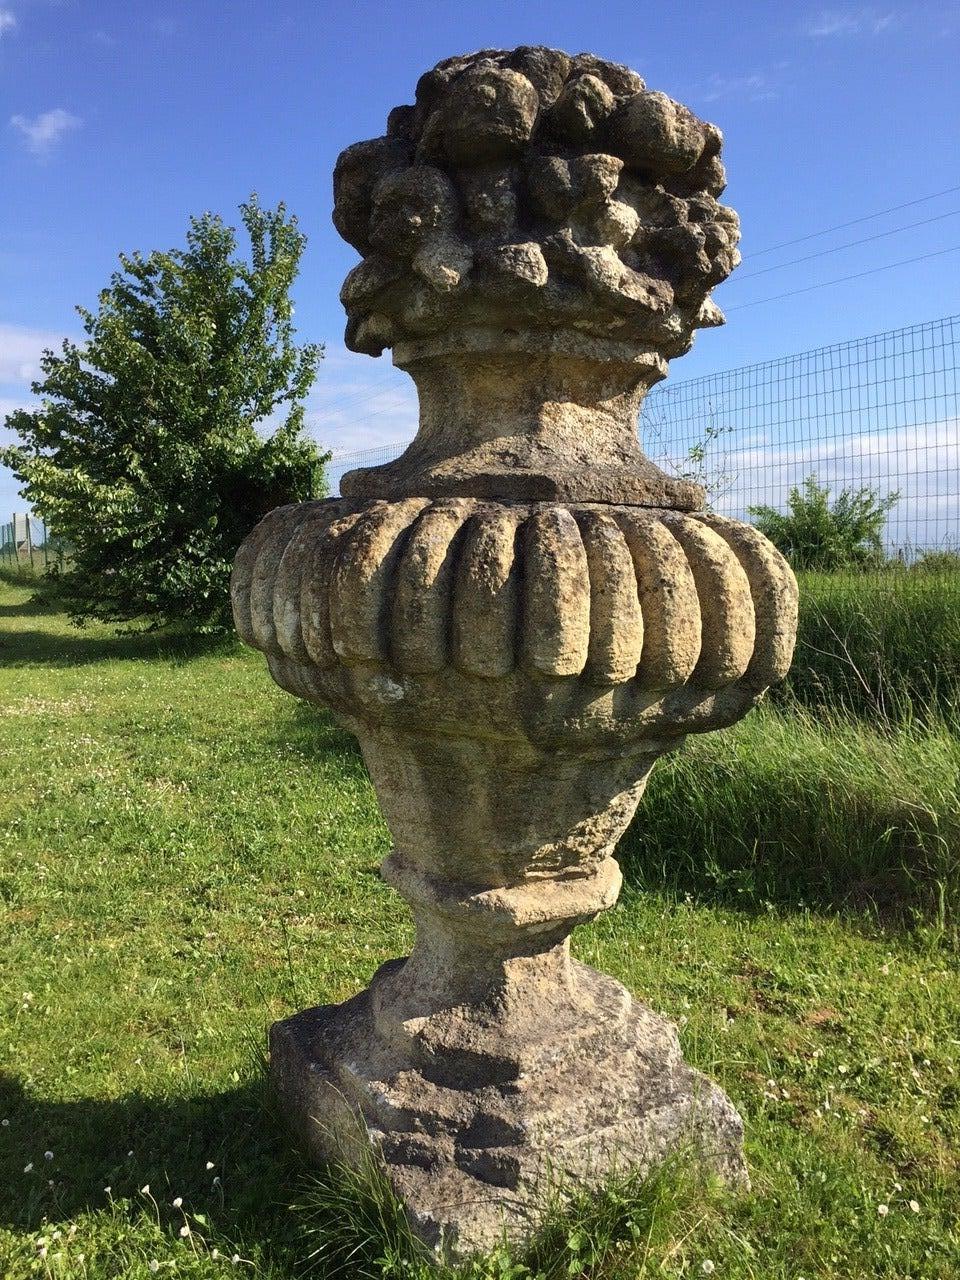 A monumental pair of French antique Louis XIV style urns-vases with floral decor on the top, handcrafted in stone, original patina. 20th century from France.
Available right now from our Los Angeles location.
Base (bottom) dimension: 25.6 inches x